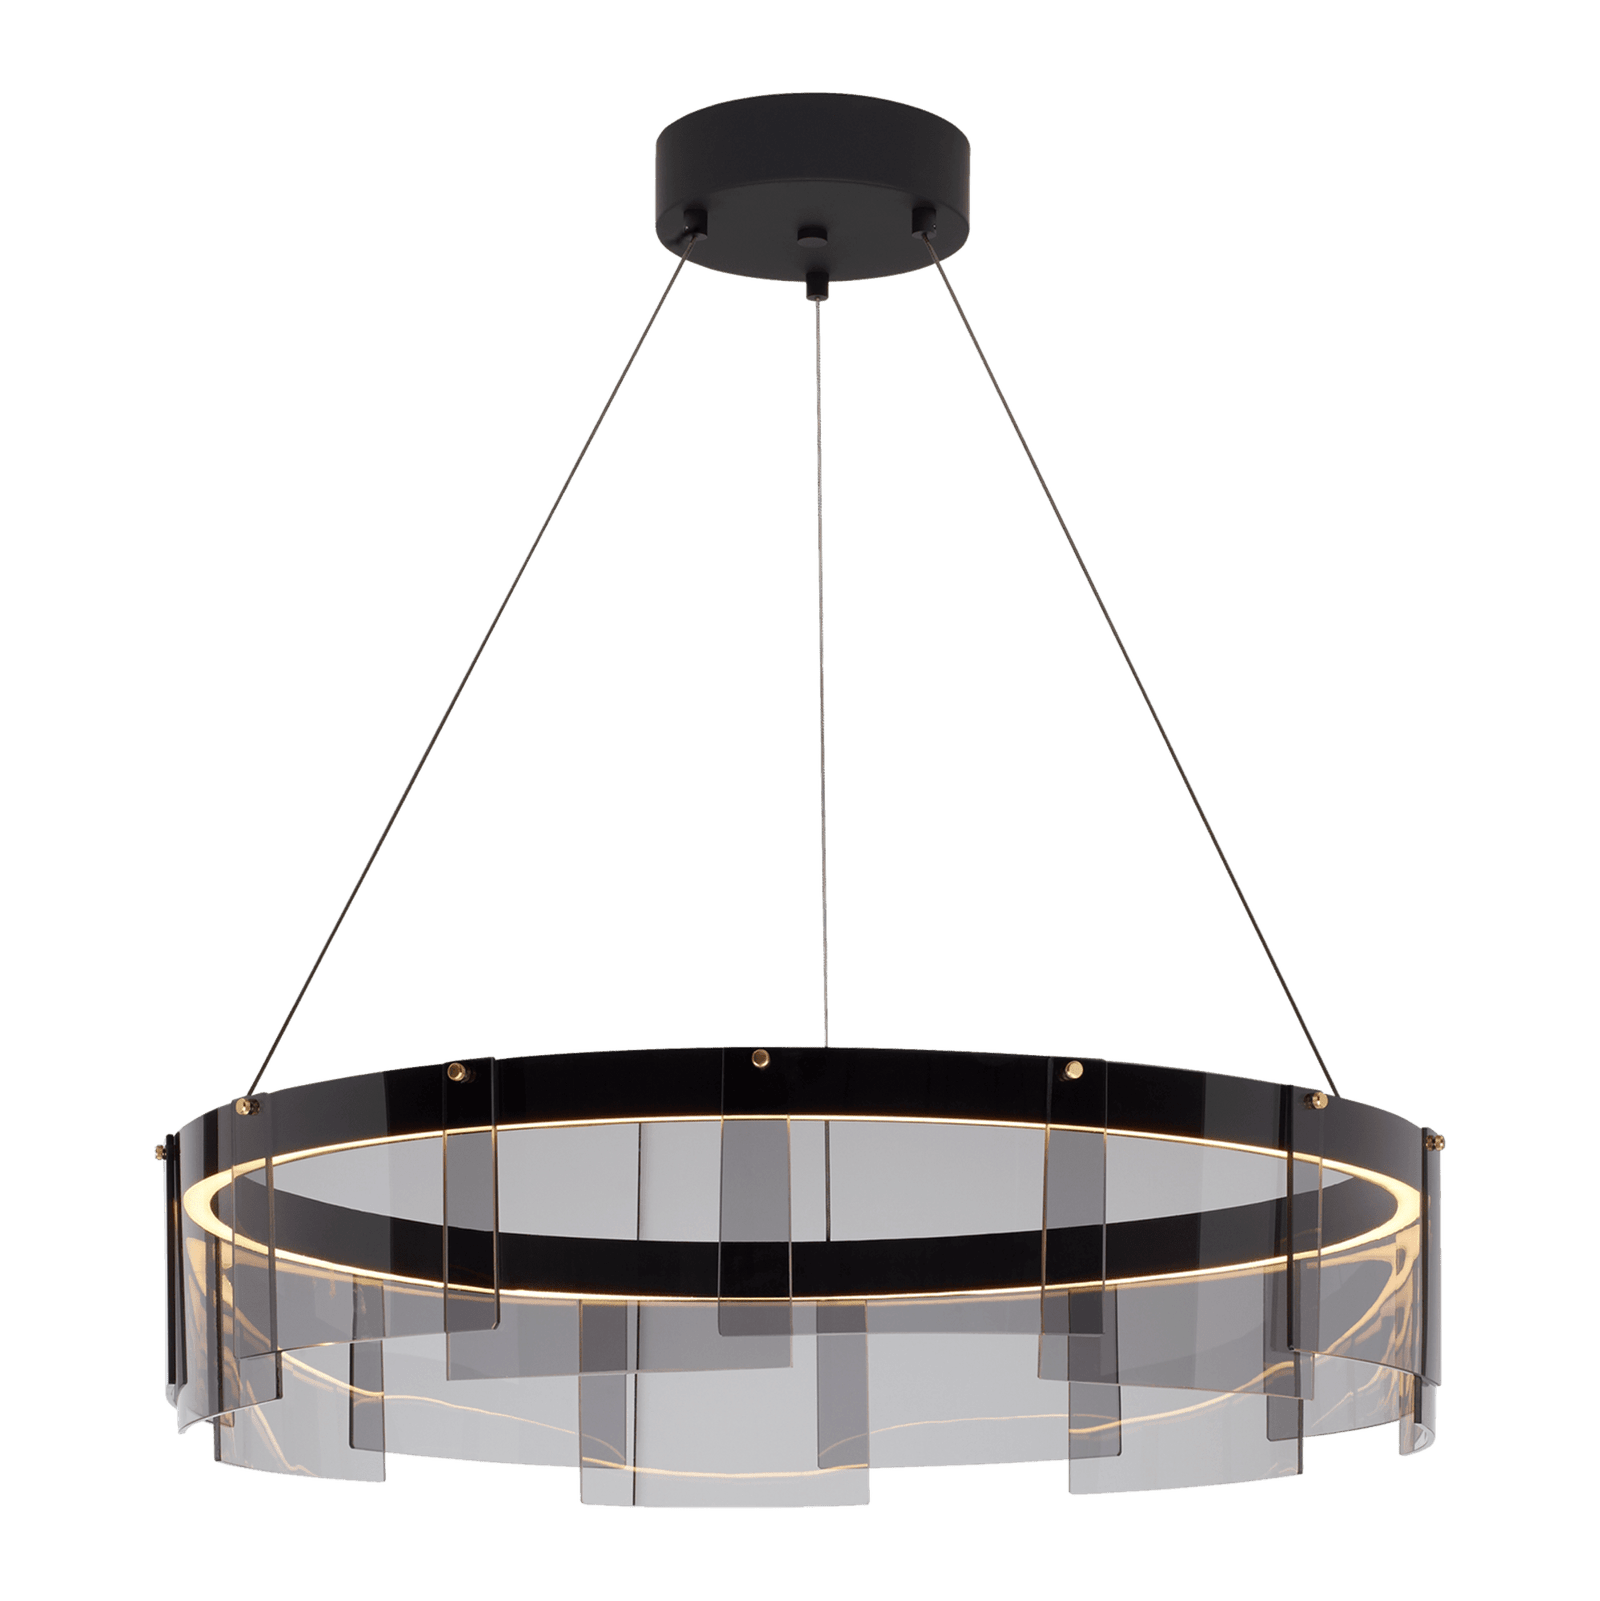 Stratos LED Chandelier in Black with Cool White Light, measuring 39.4″ in diameter and 7.9″ in height (100cm x 20cm)